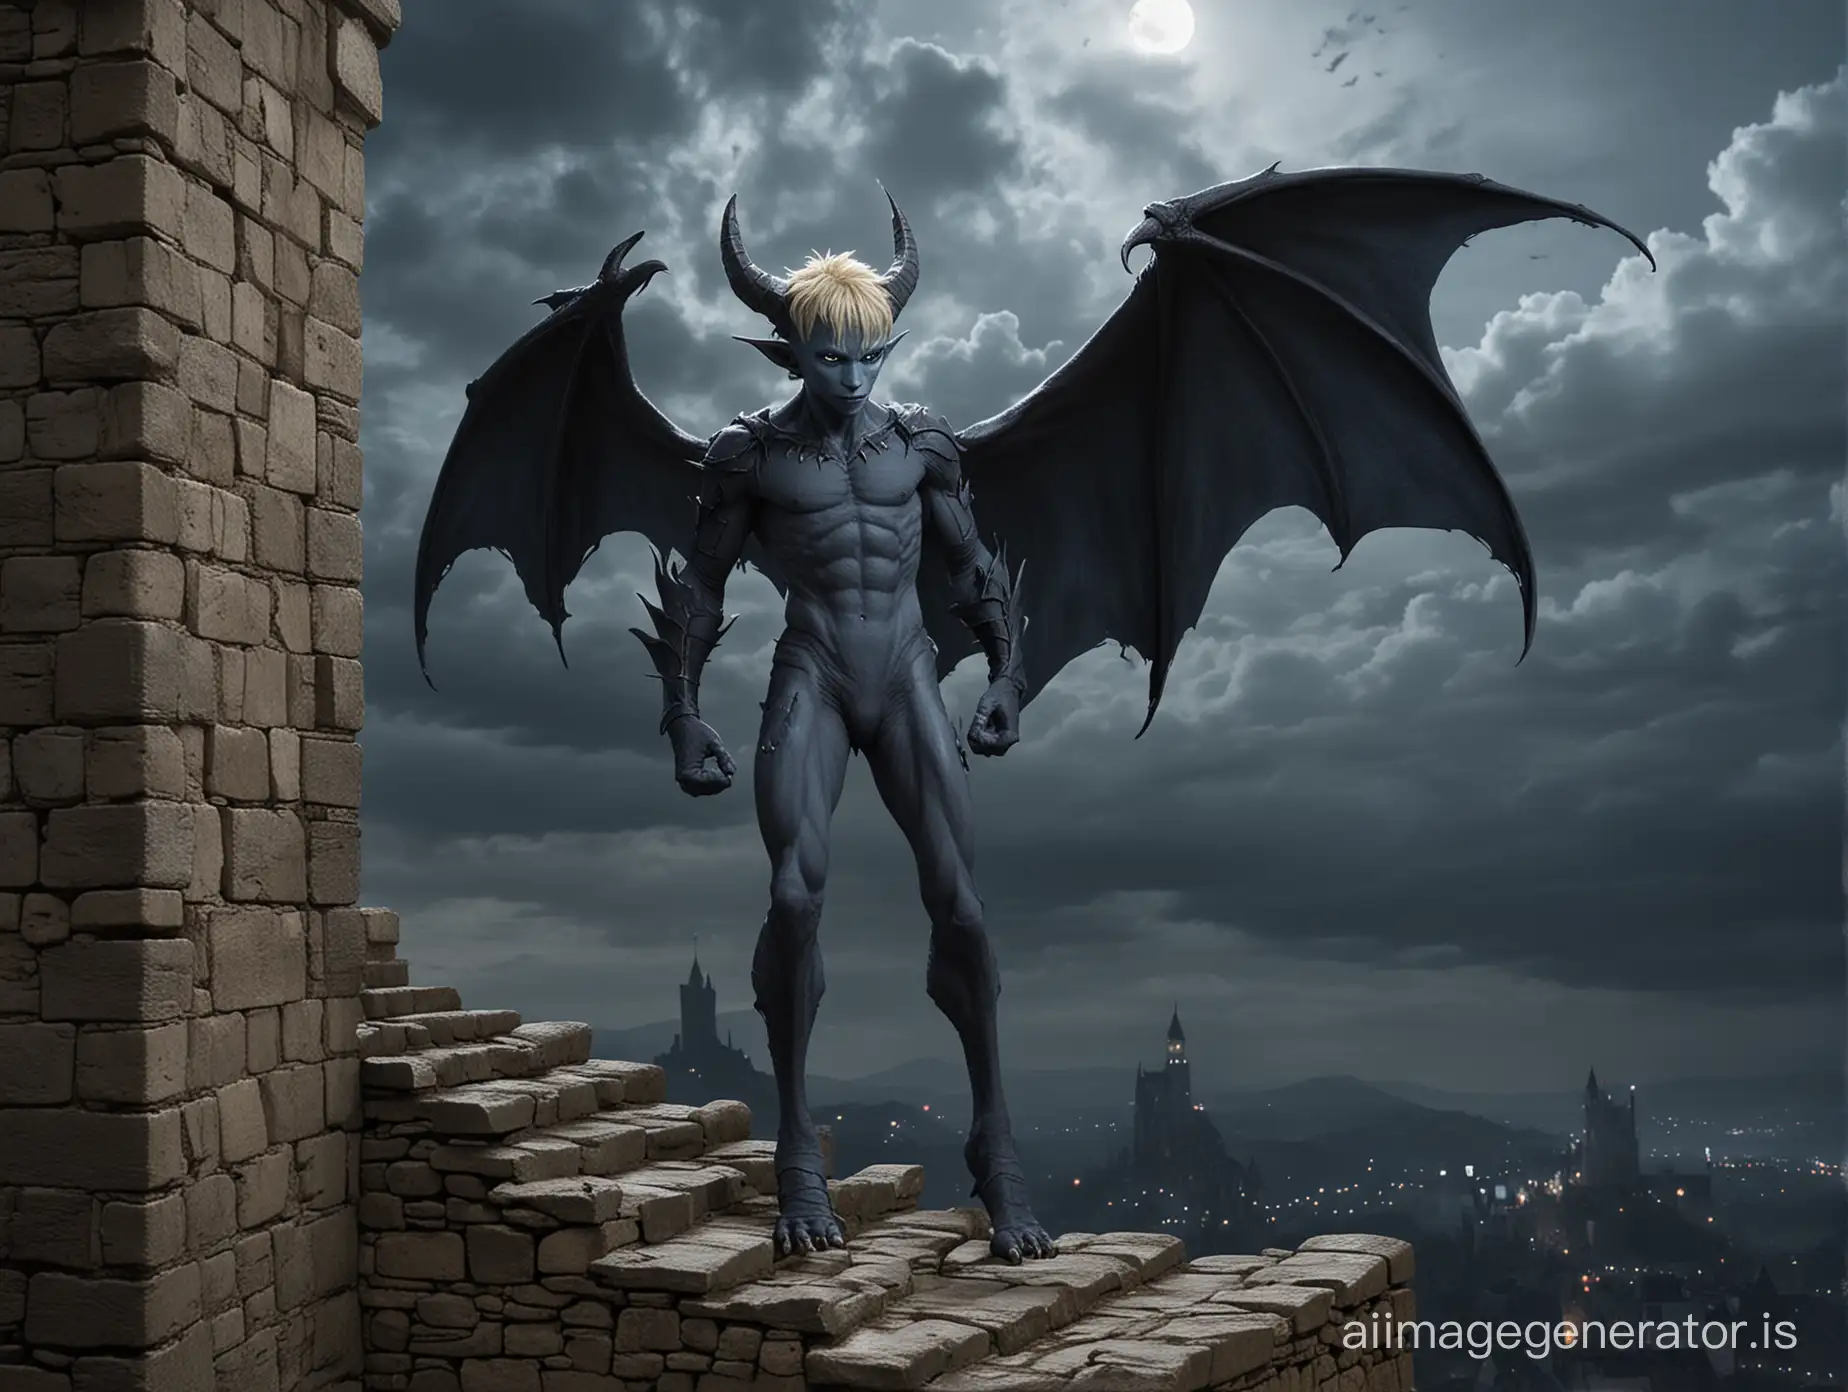 It’s Night. A gray-blue-skin demon-boy with humanoid proportions. He has a large tail, growing at the end of his spine. He has natural bat-like wings.  Two small horns growing from the forehead. He has pointed ears. He has blonde hair. He has claws instead of fingers and toes. He has animal-like feet. He stands on an old castle in a dark cloudy Night. Show the entire boy in a long shot. He has a Schwanz.